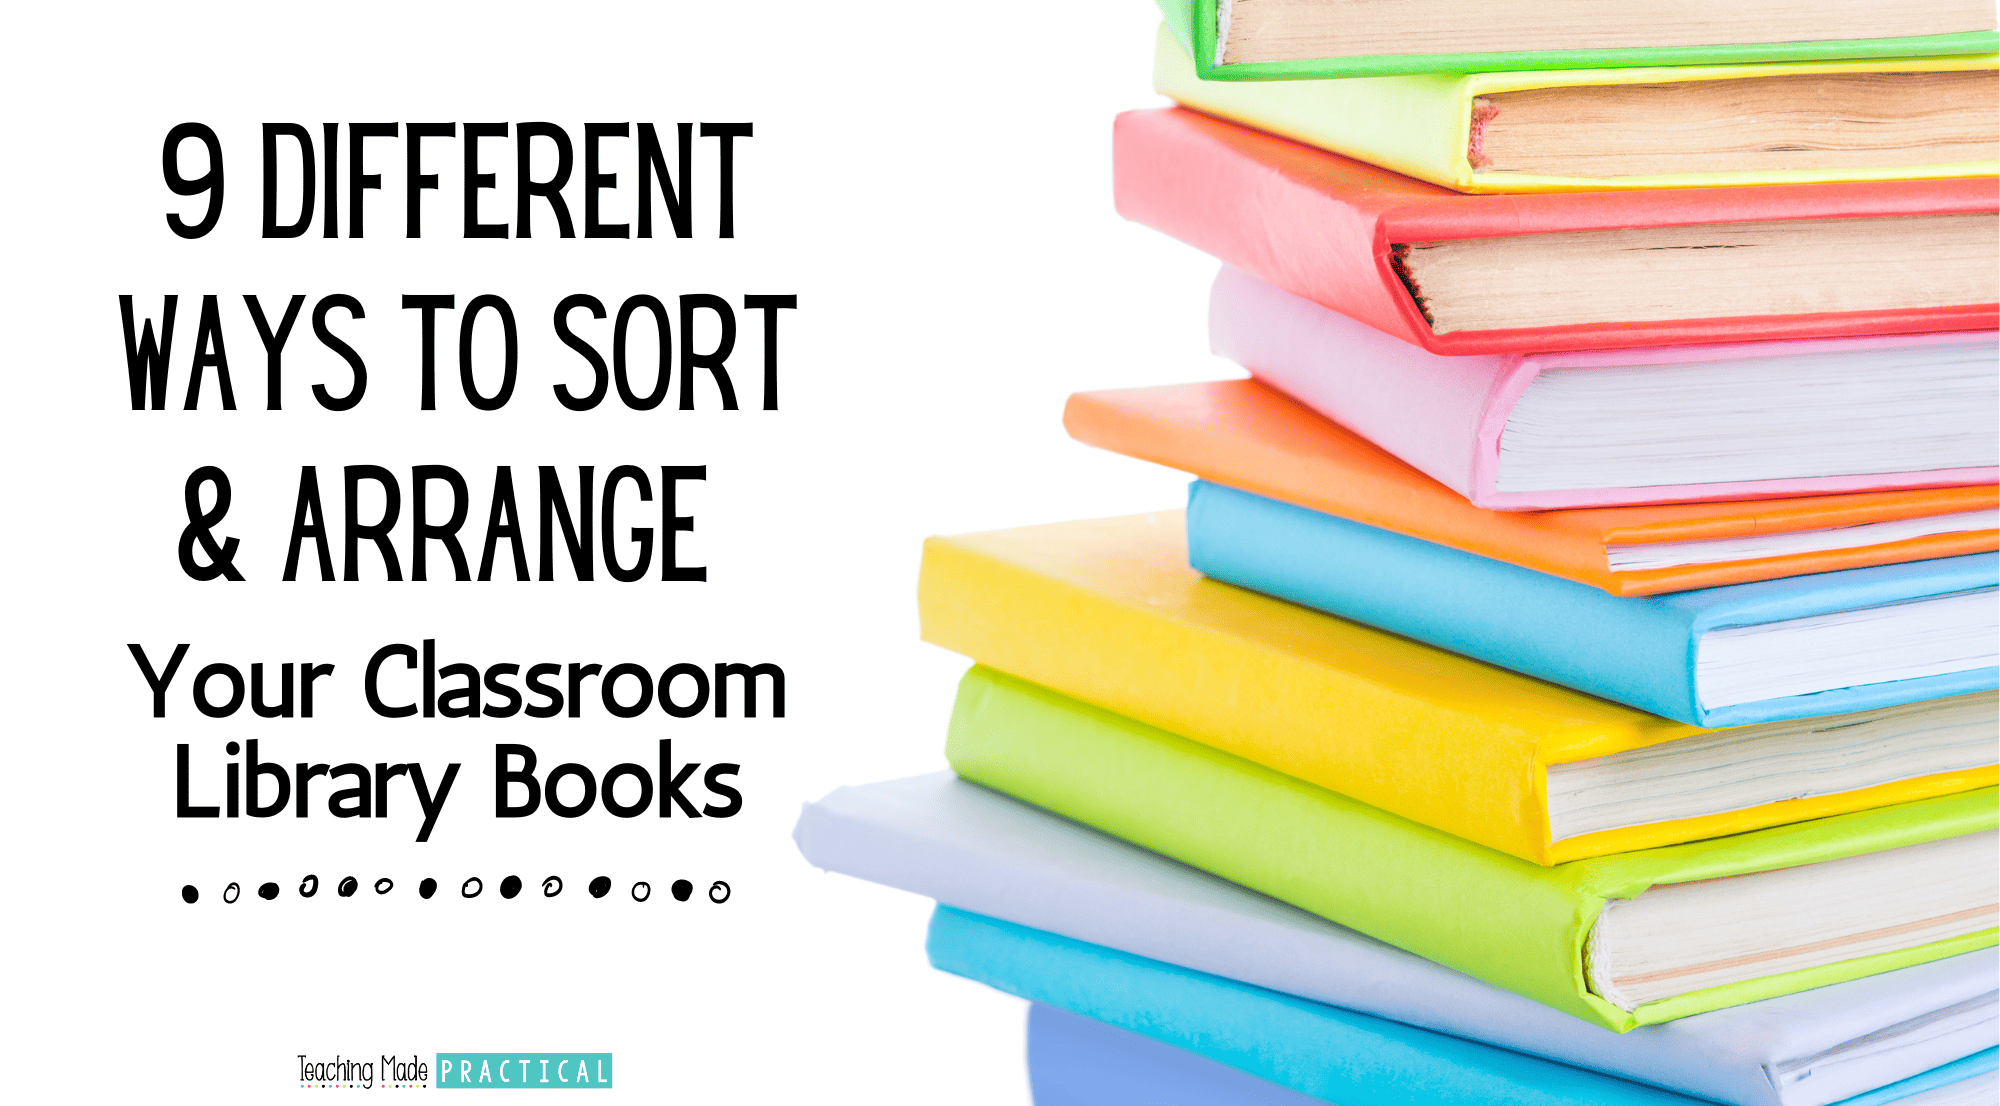 How should you arrange your 3rd, 4th, and 5th grade classroom library books? Check out these 9 different ideas.